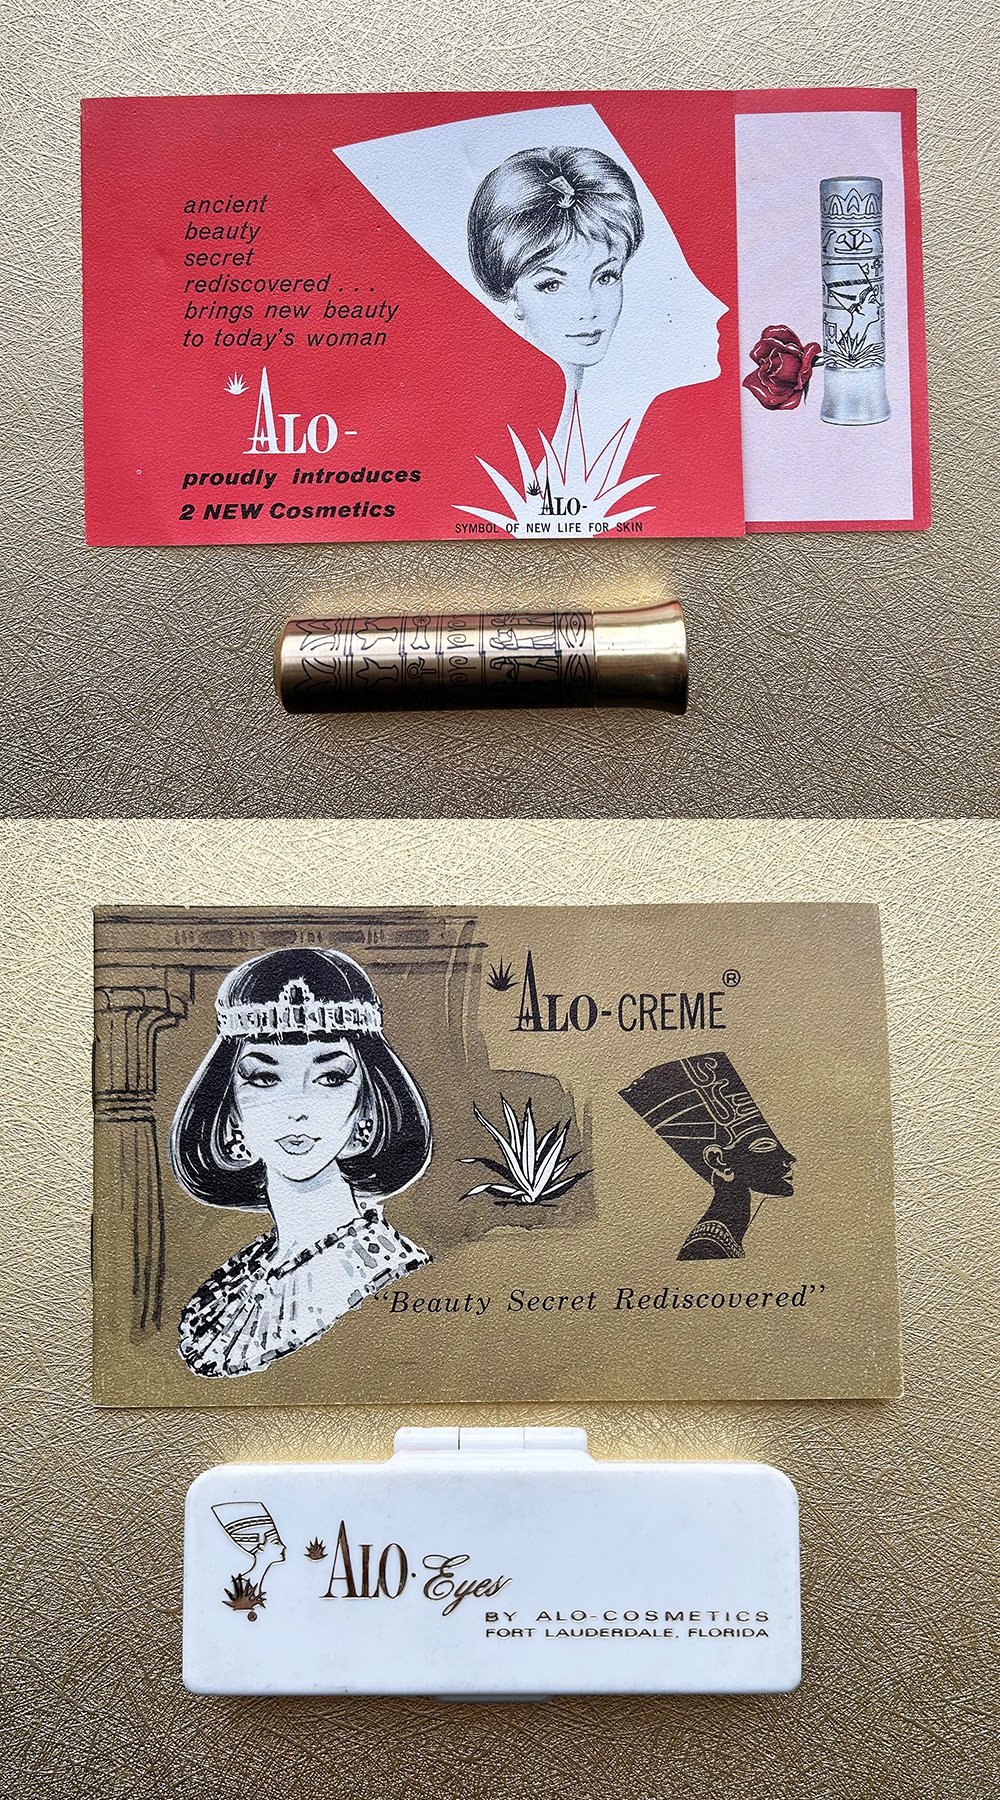   Brochures, Lipstick and Eyeshadow Alo Cosmetics Ca. 1960s   While aloe vera was used in commercially available skincare since the 1950s, Alo was possibly the first brand to infuse color cosmetics with the ingredient. Aloe Crème Laboratories was fou